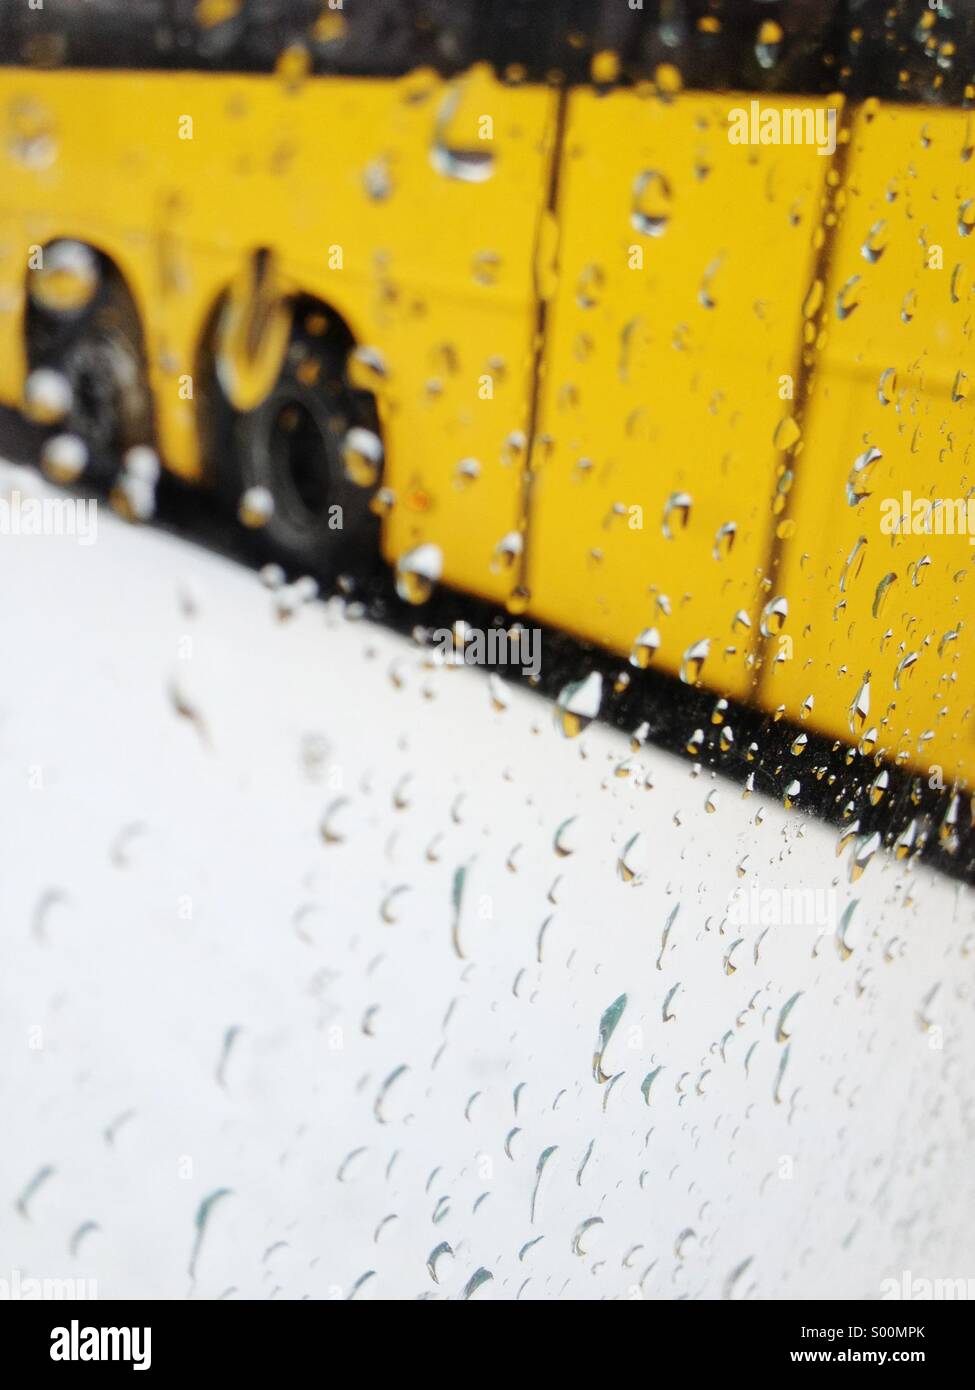 Yellow bus blurred behind water drops on window from wet snow and rain. Stock Photo